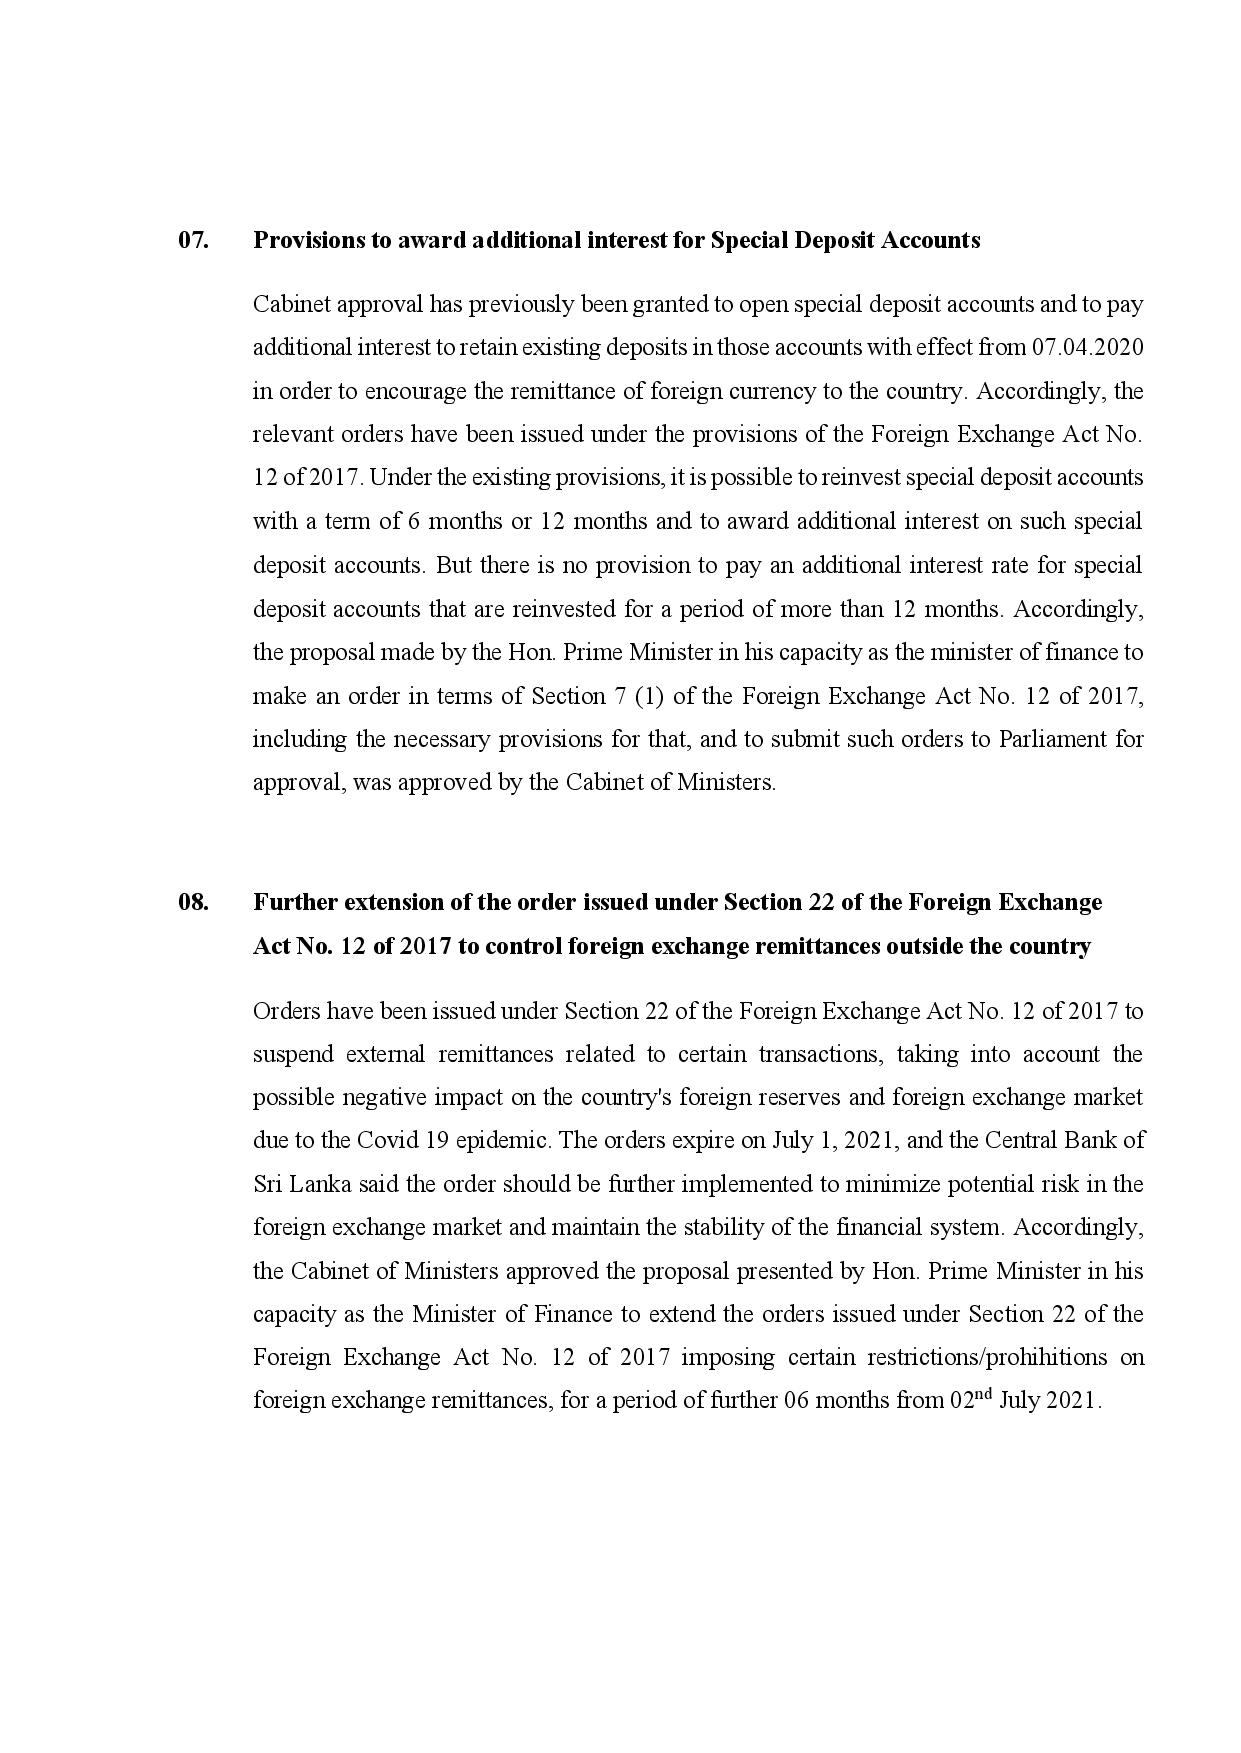 Cabinet Decision on 28.06.2021 English page 004